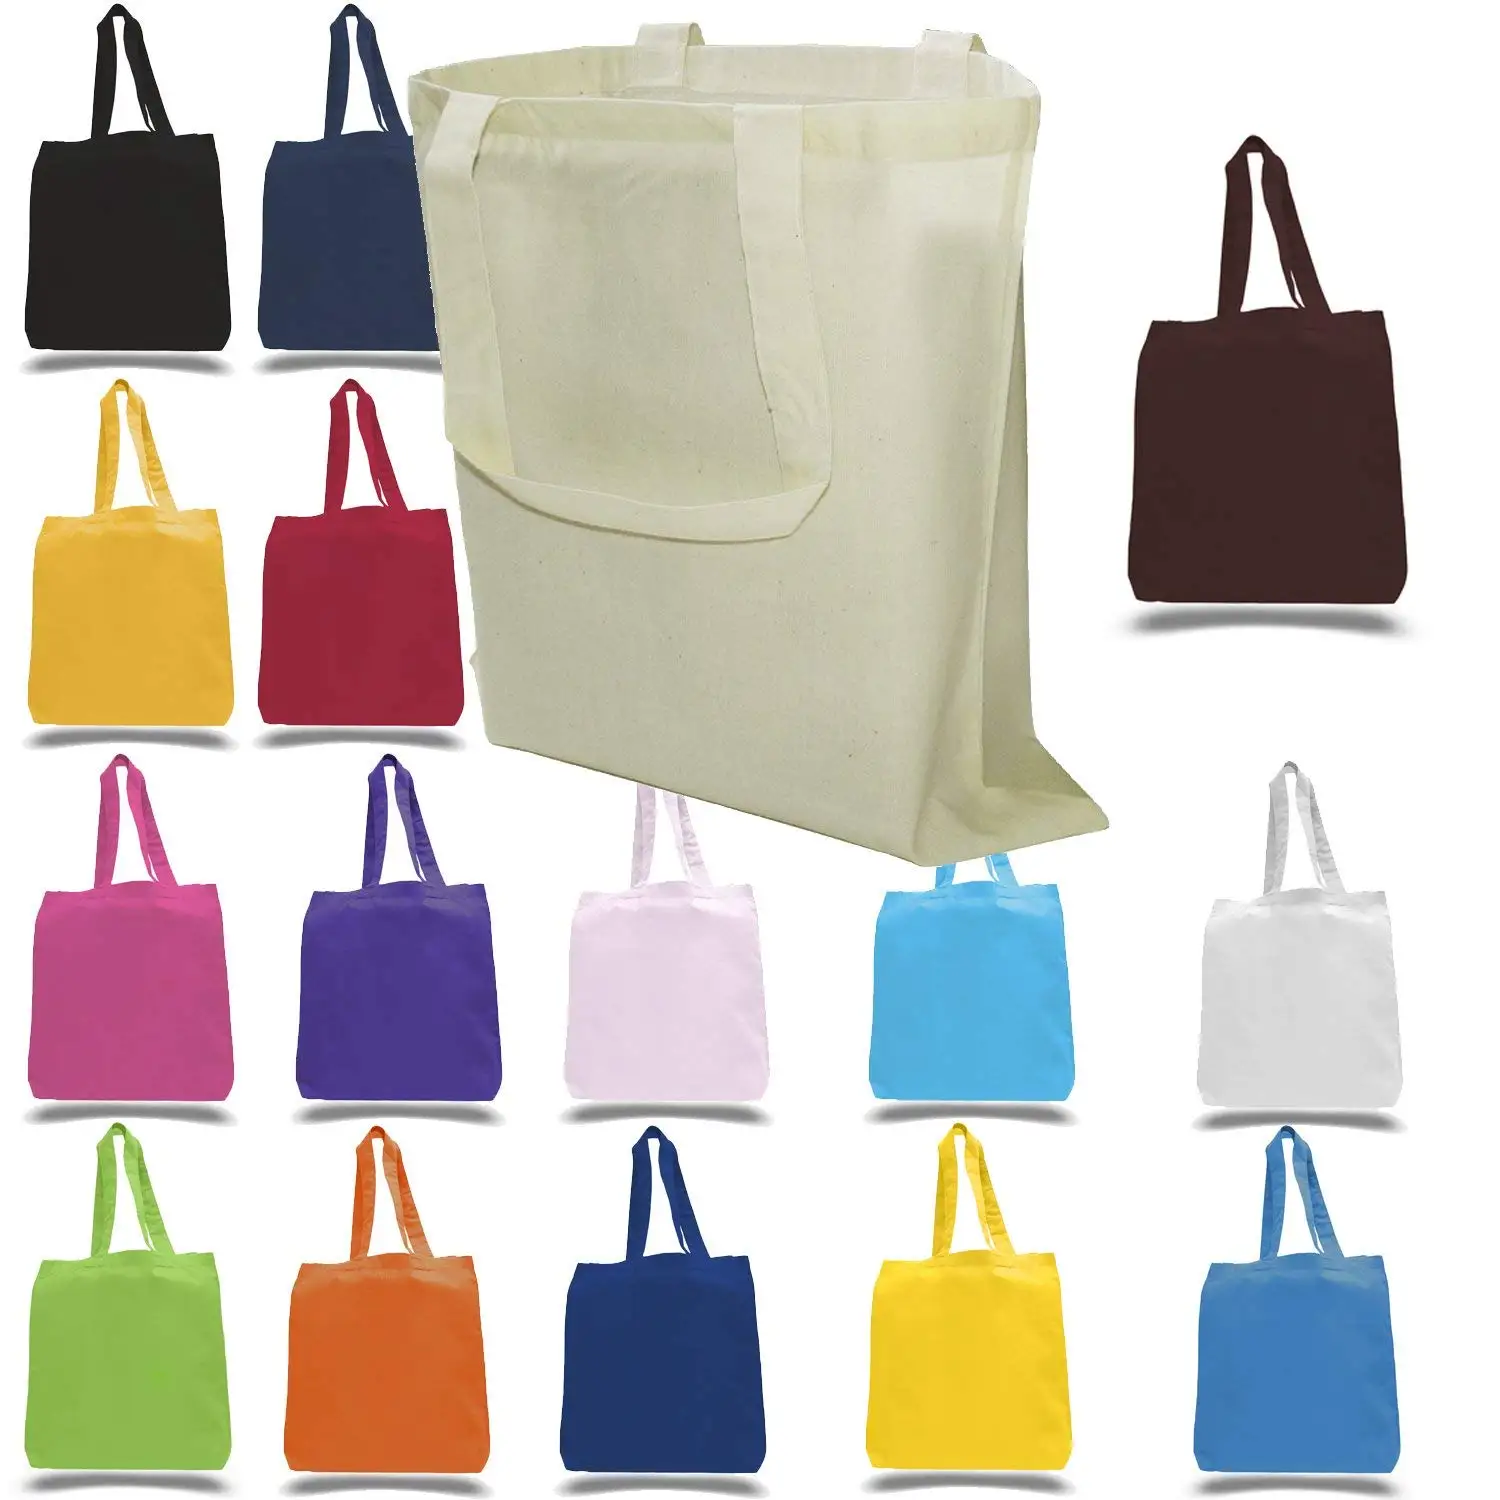 Buy Cotton Canvas Tote Bags Bulk (20 PACK) Mix Colors Shopping Tote ...